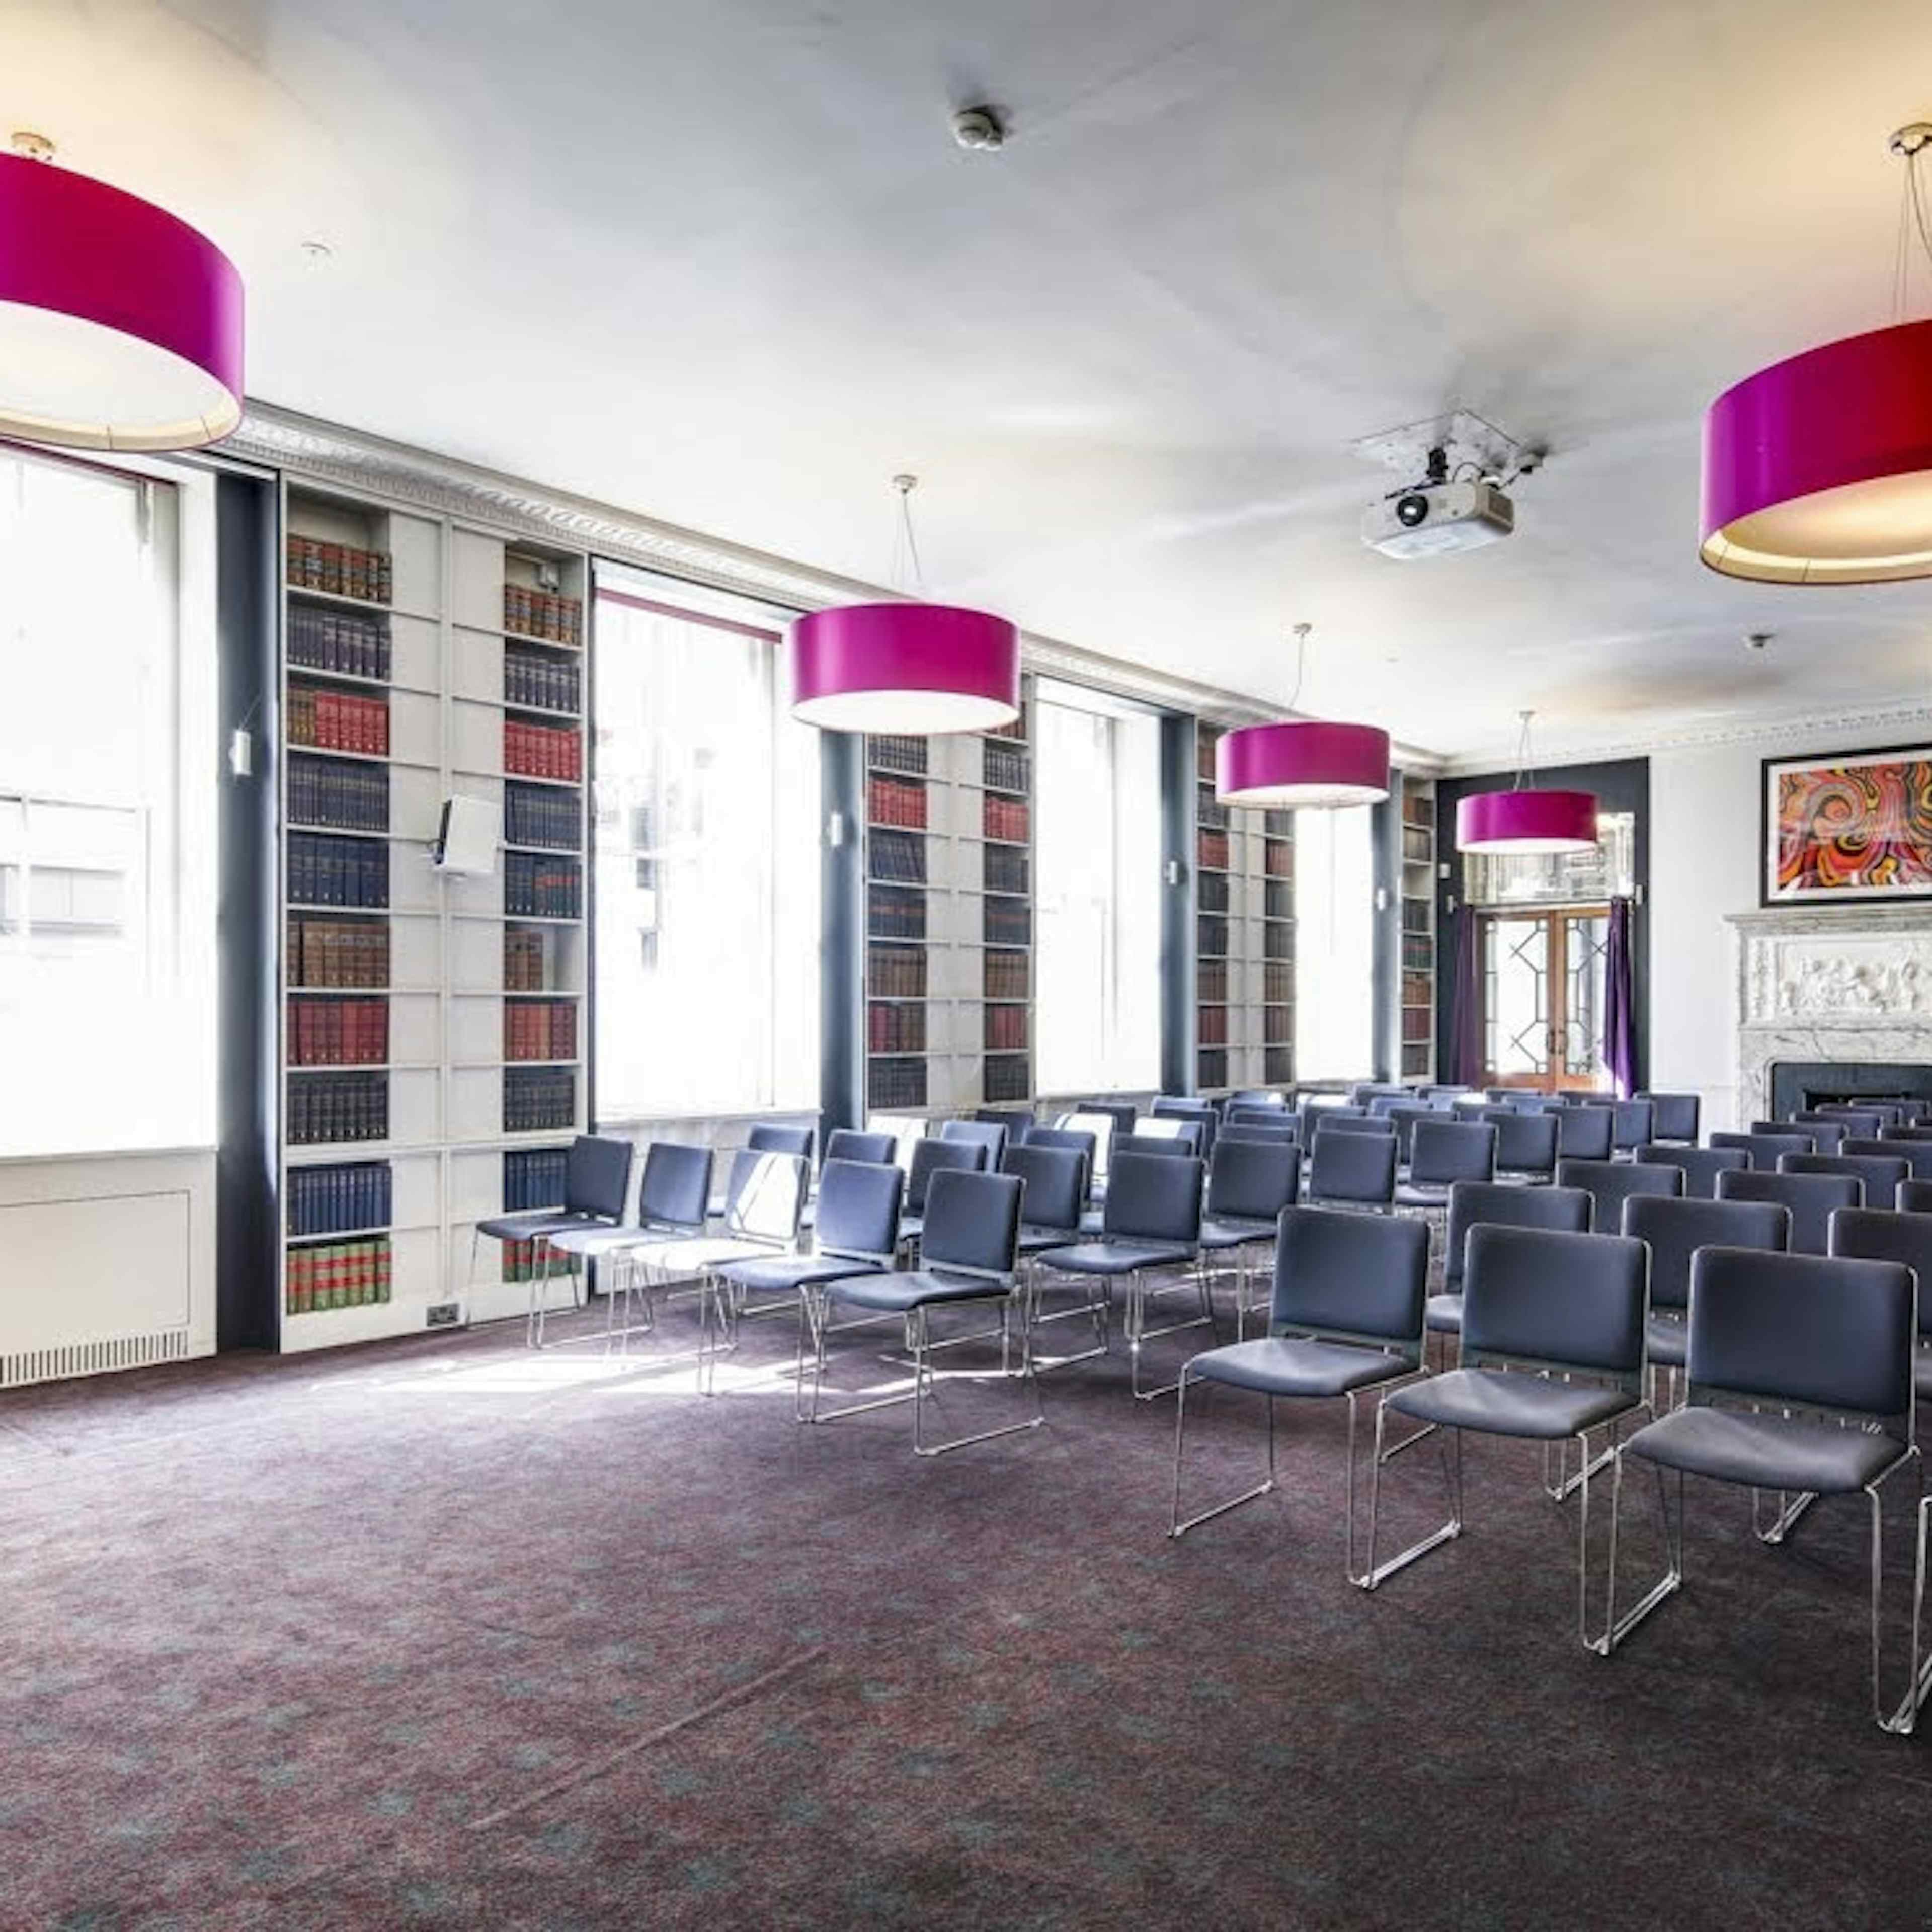 Royal Institution Venue - The Conversation Room and Mezzanine image 3